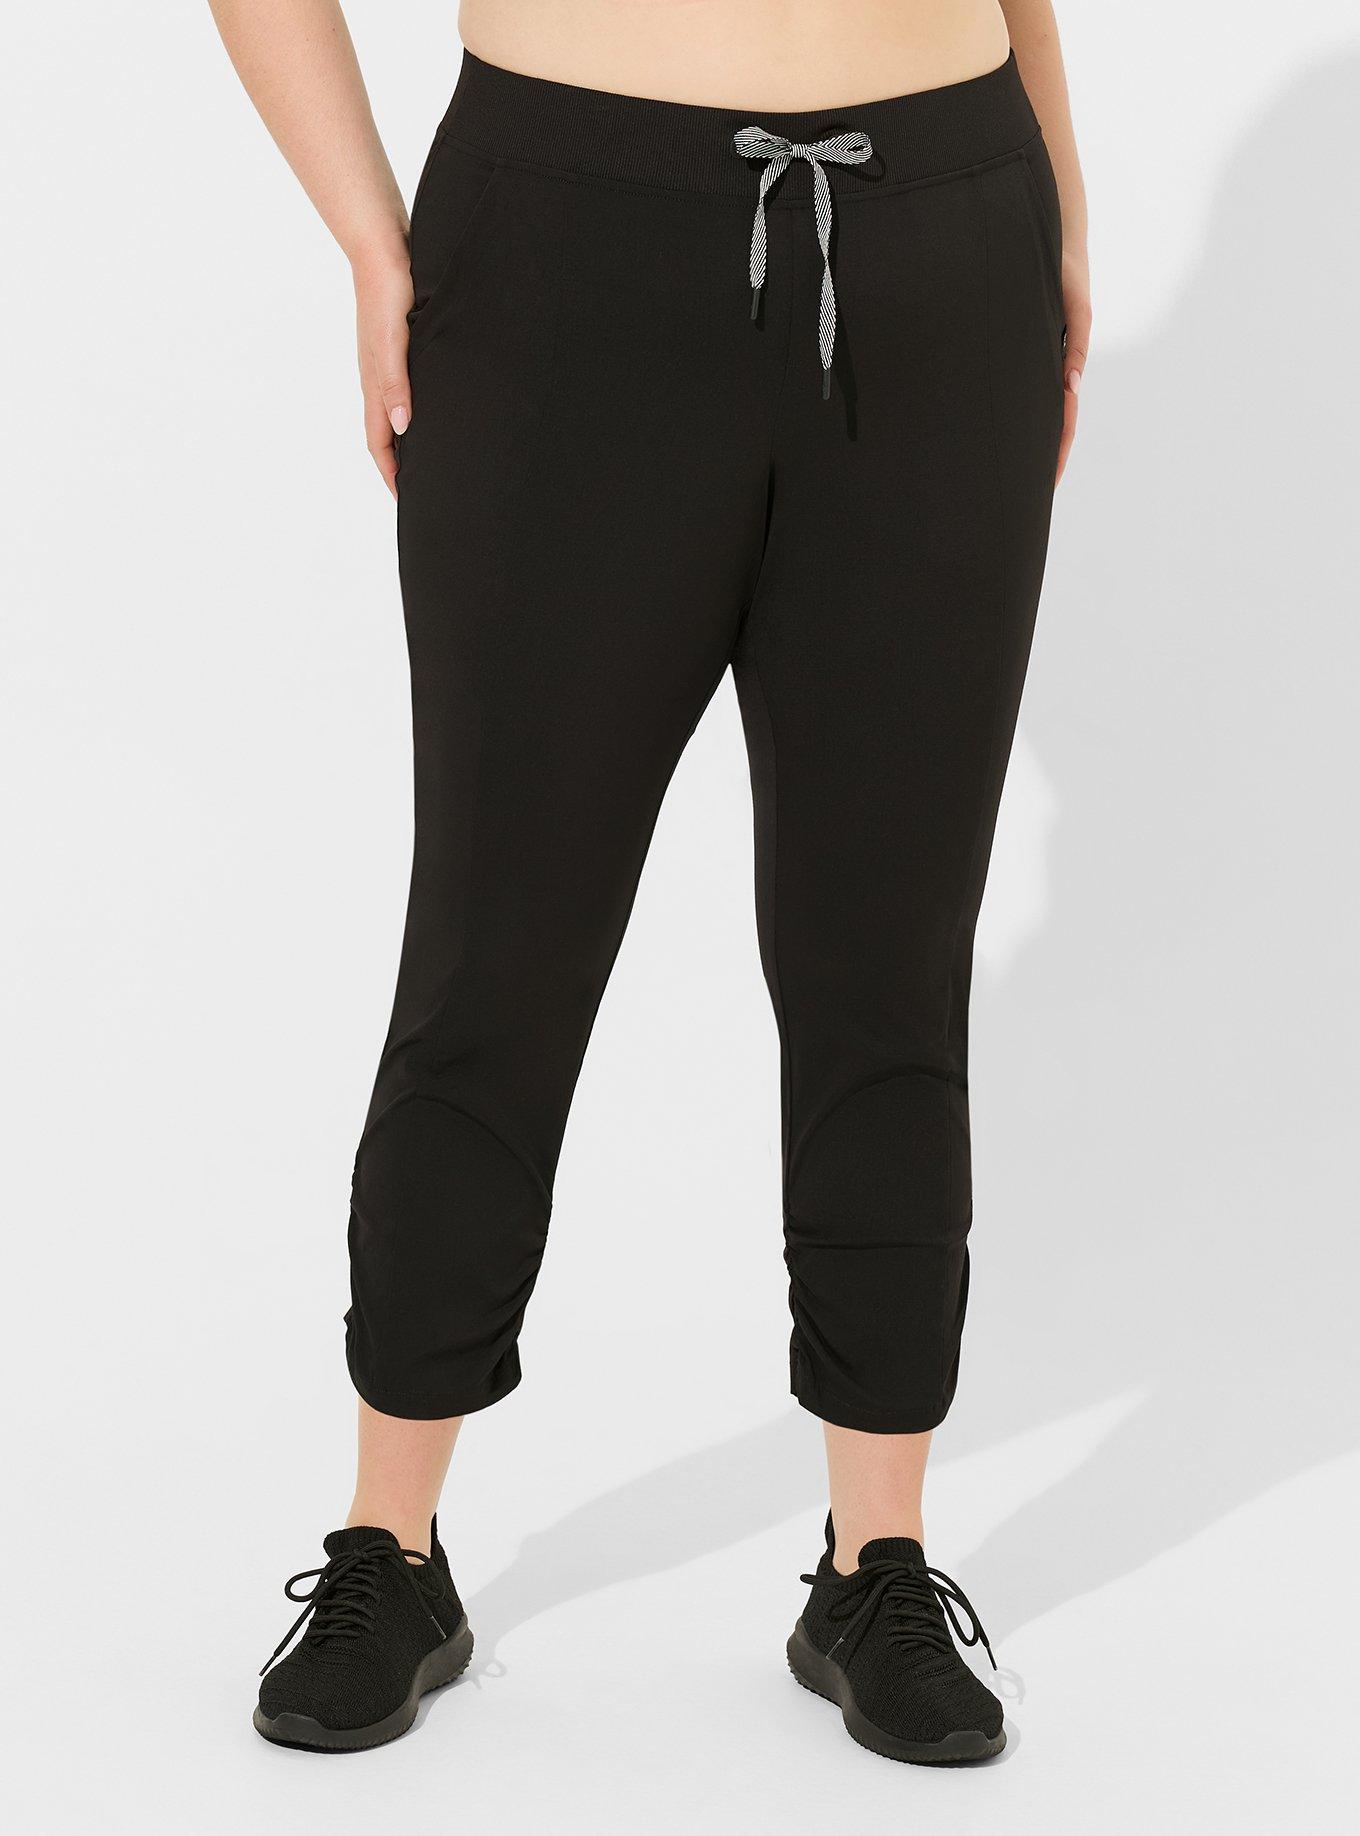 Buy Victoria's Secret PINK Deep Lake Wash Performance Cotton Fold Over Yoga  Pants from Next Ireland